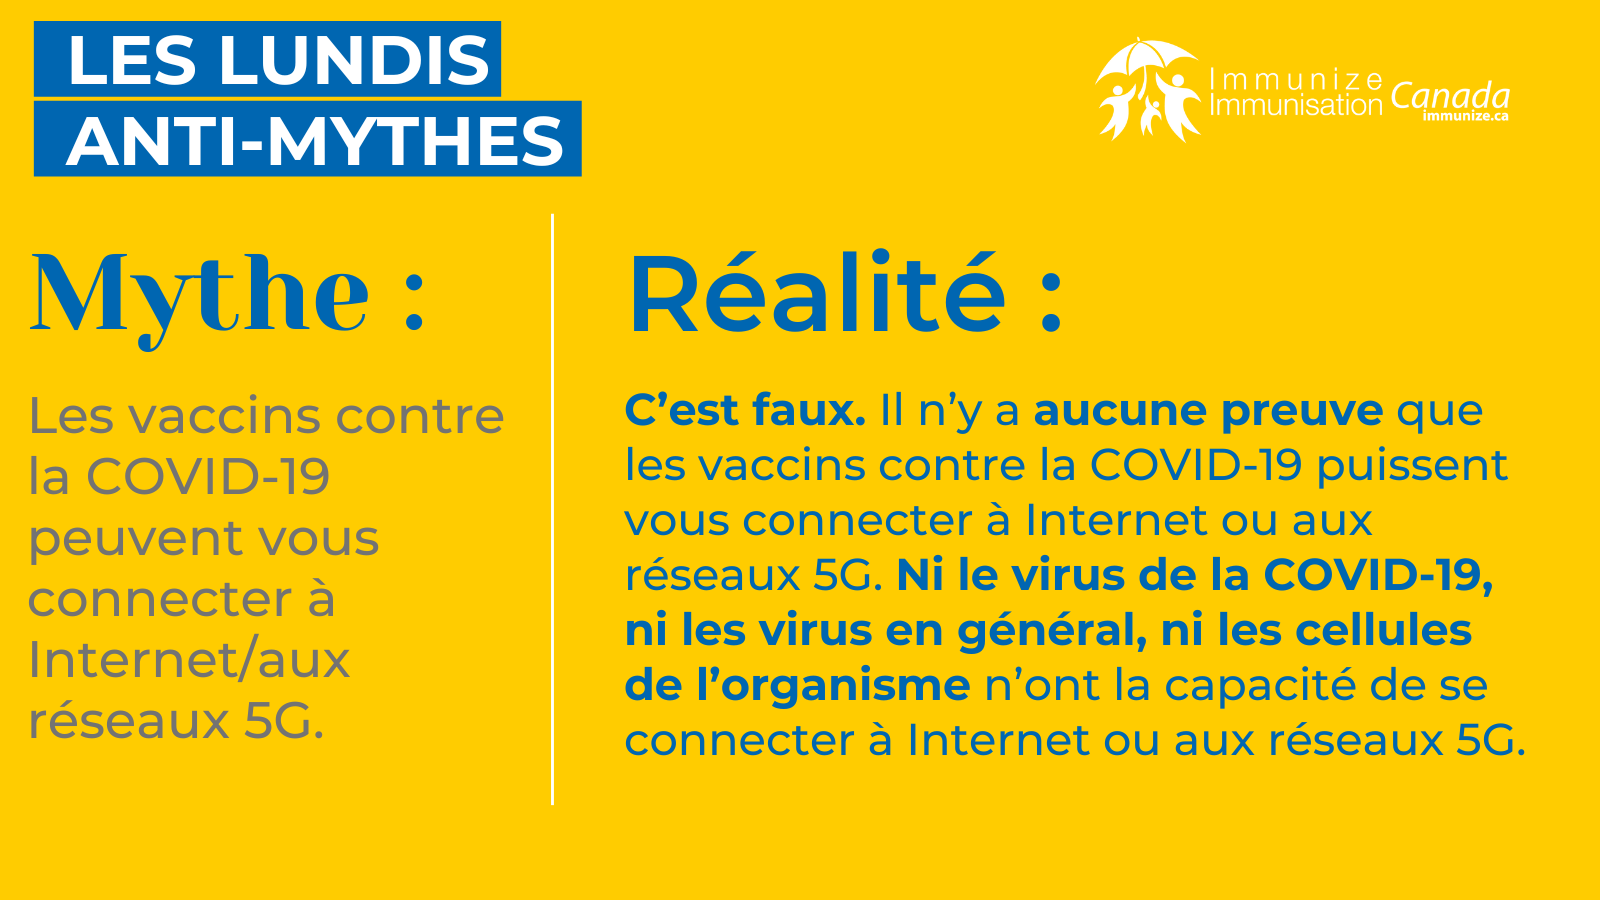 Les lundis anti-mythes - COVID-19 - image 11 pour Twitter/X